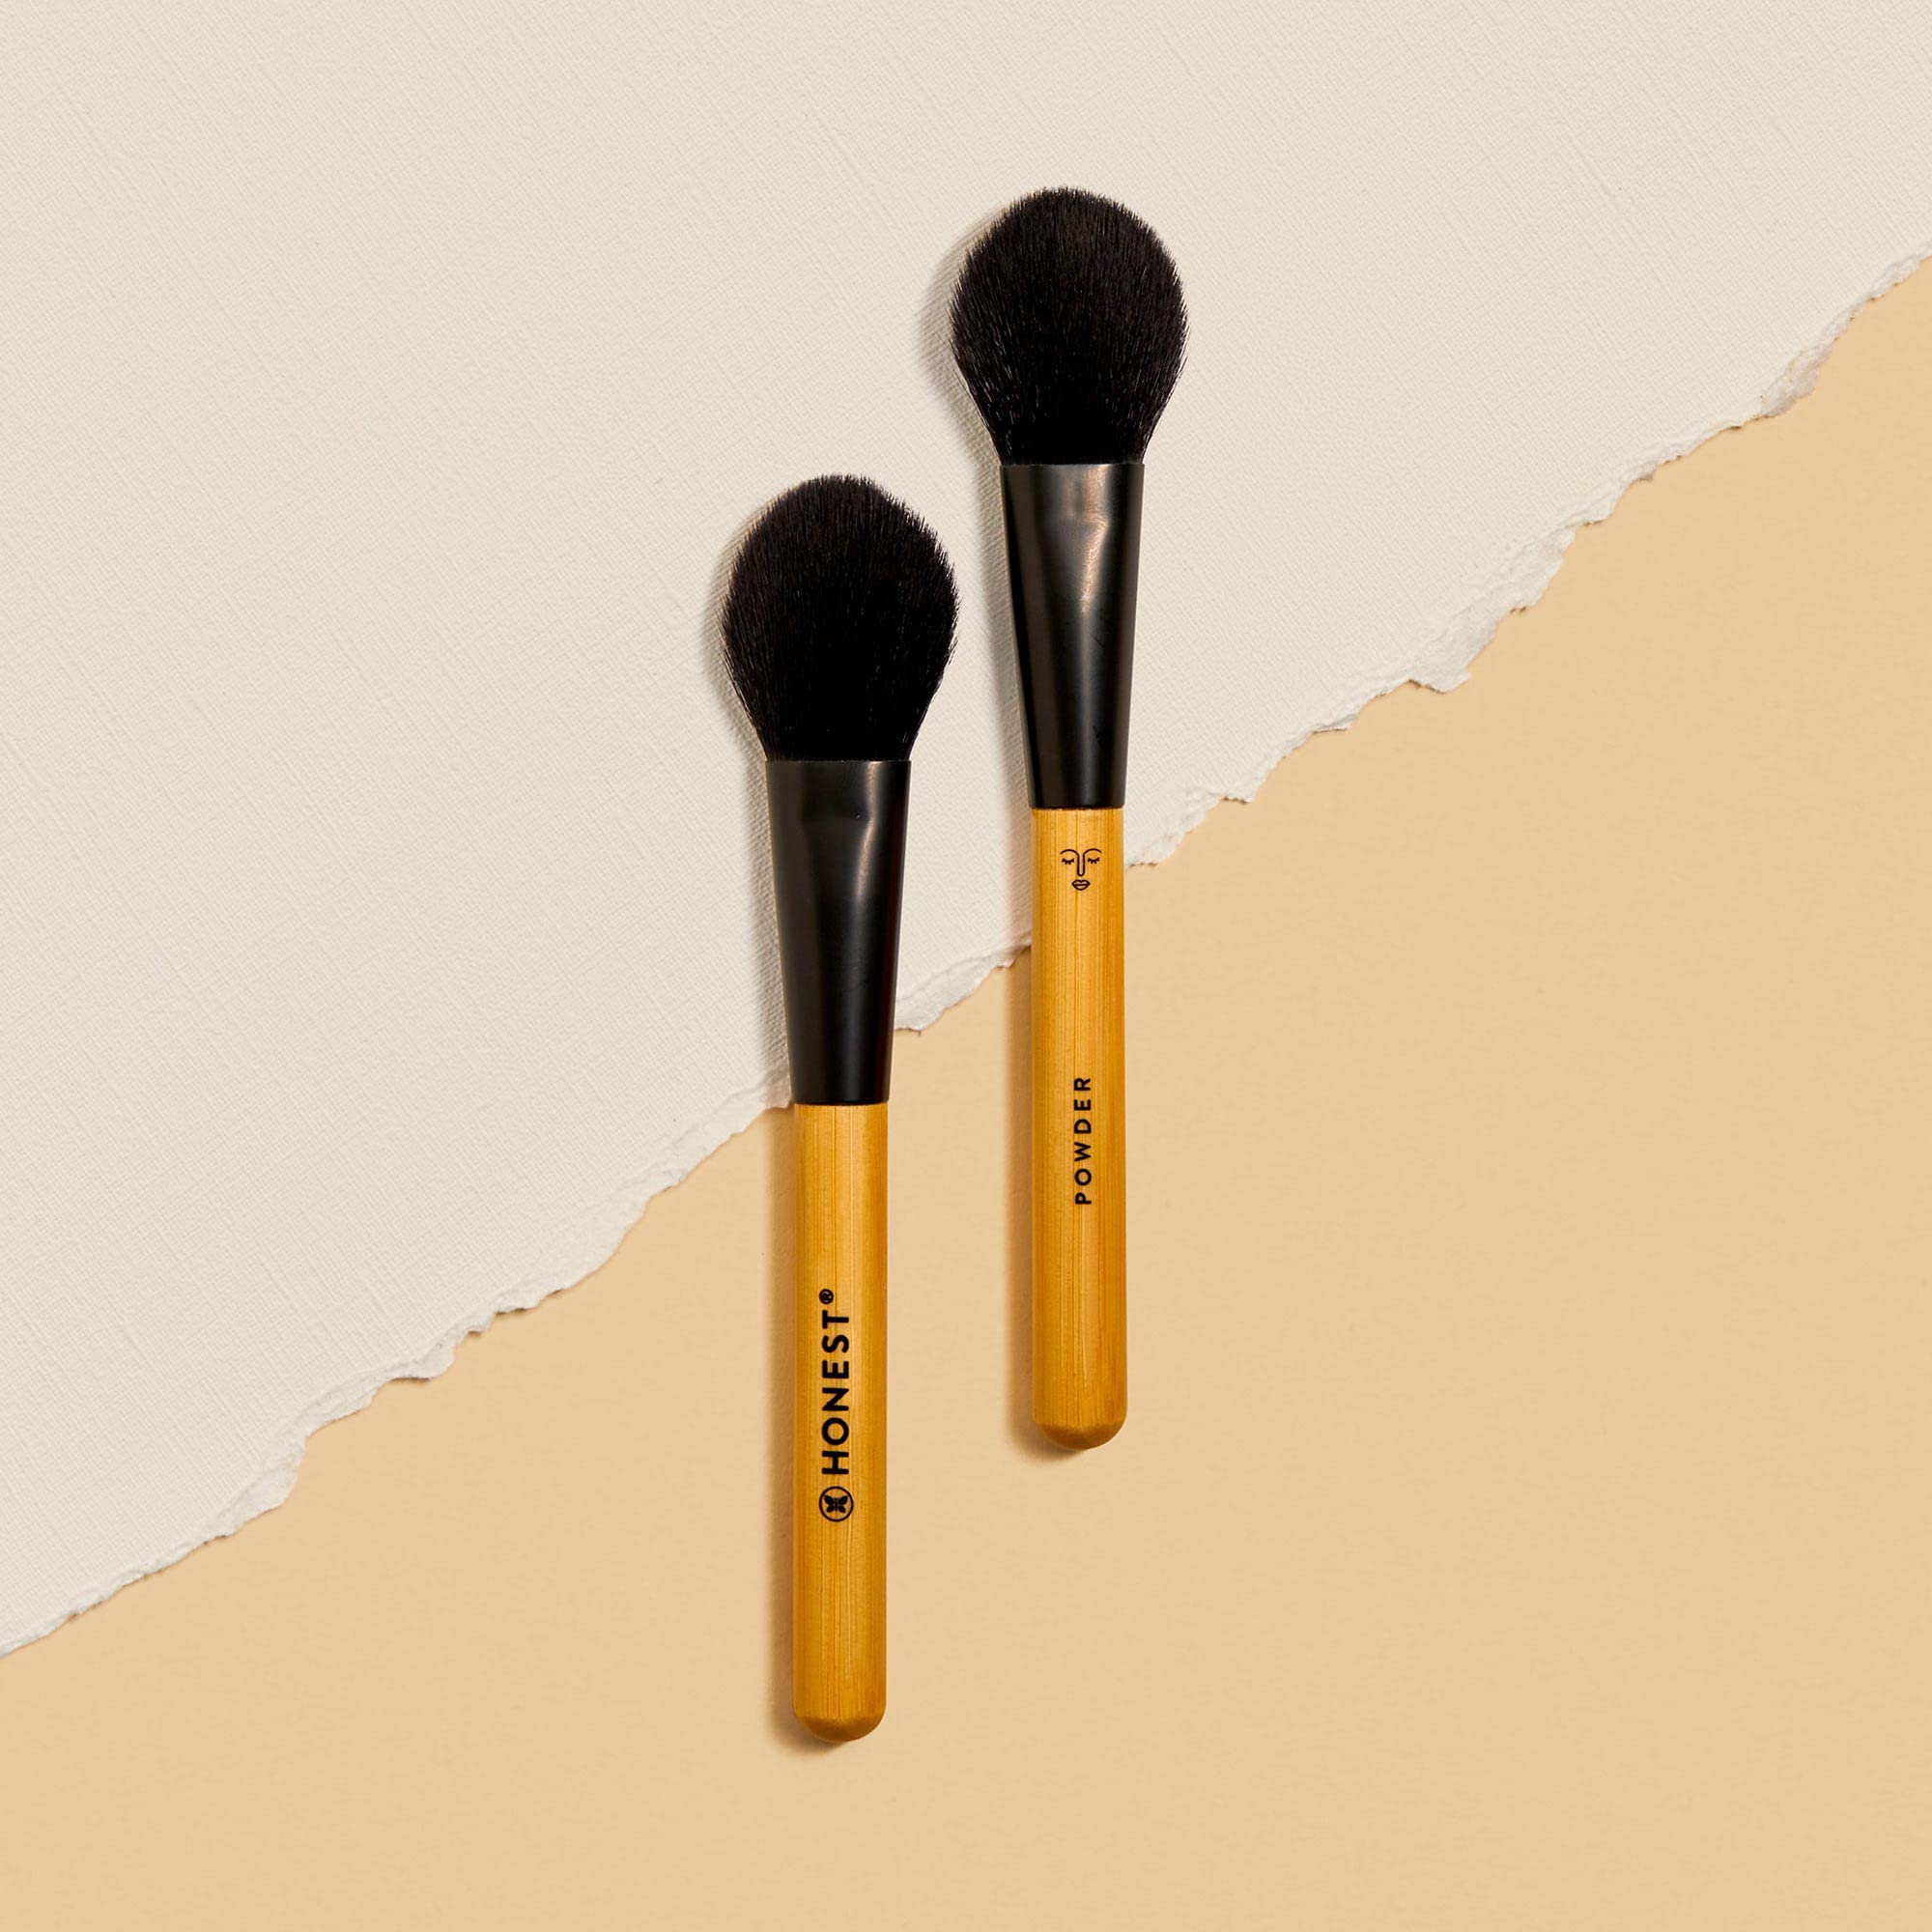 Honest Beauty Powder Brush with Renewable Bamboo + Synthetic Bristles | Makeup Brush for Loose + Pressed Powders | Cruelty Free | 1 count